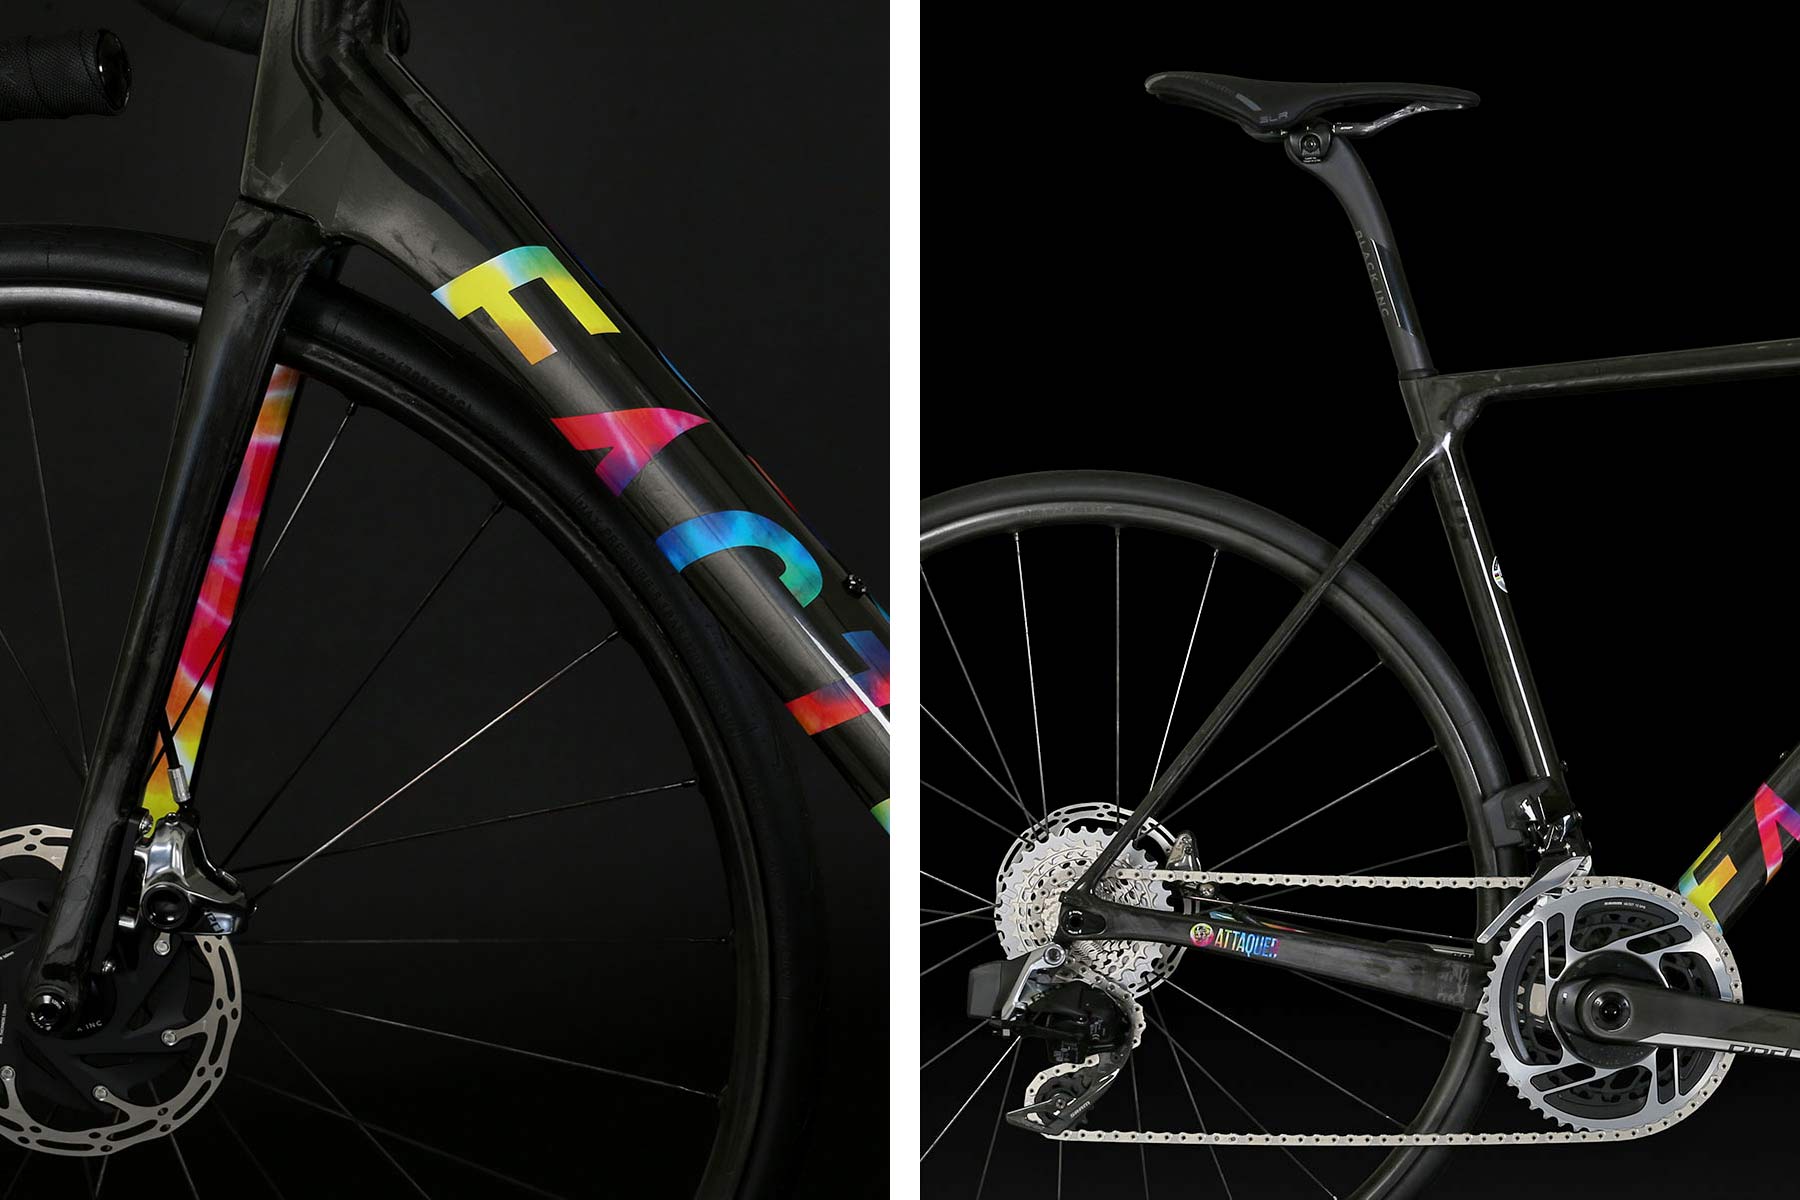 Factor O2 VAM is a full-internal routing ultralight carbon climber's road bike that weighs just 677g, frame details